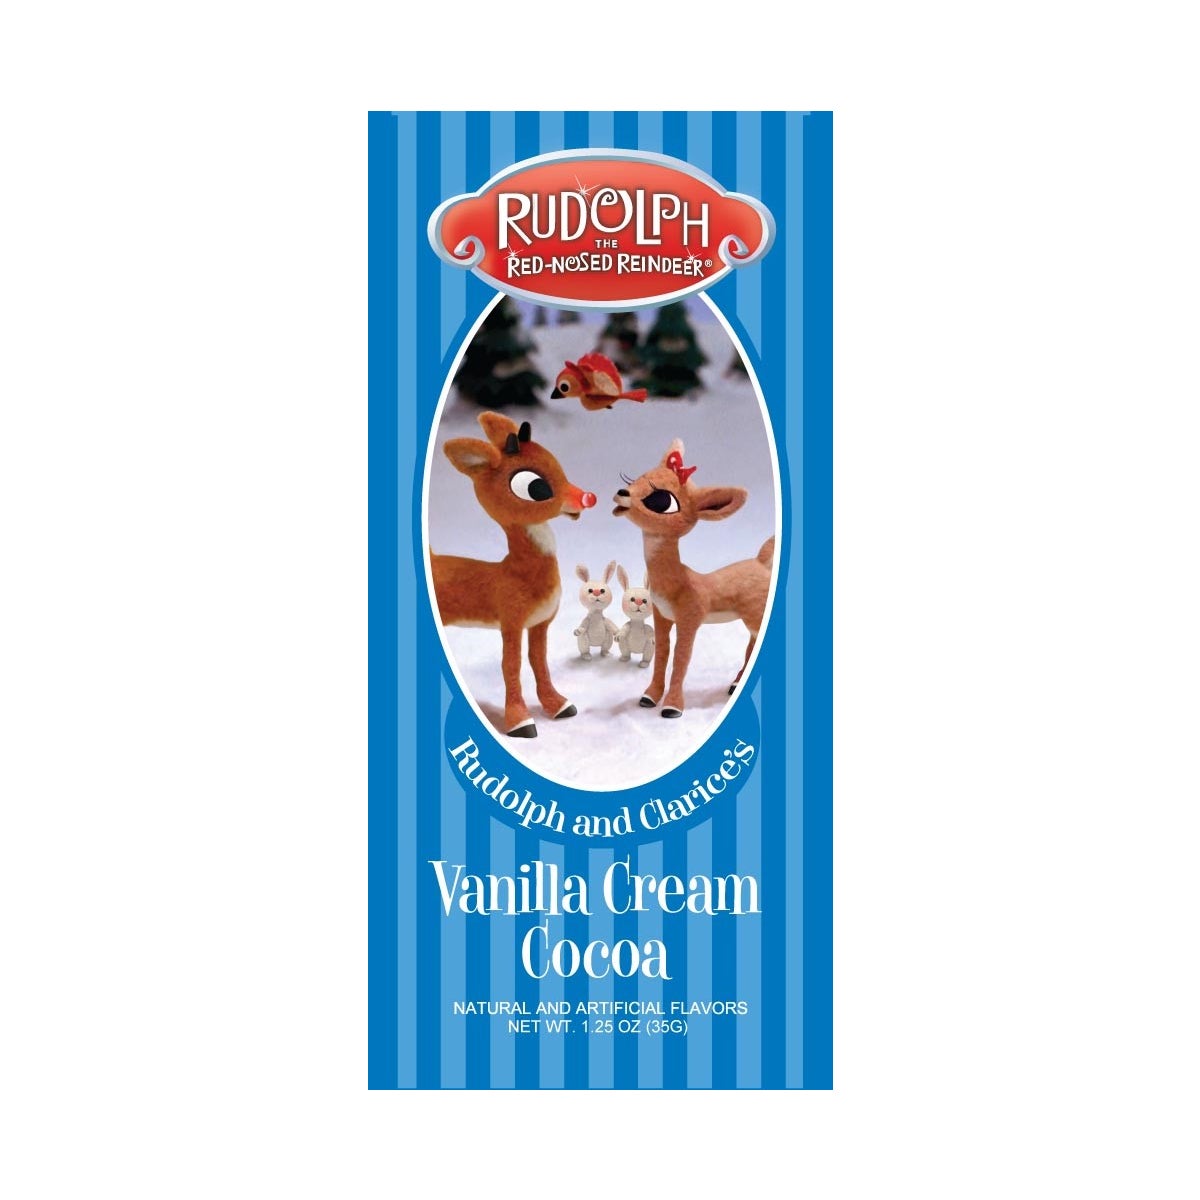 Rudolph and Clarices’s Vanilla Cocoa Packets